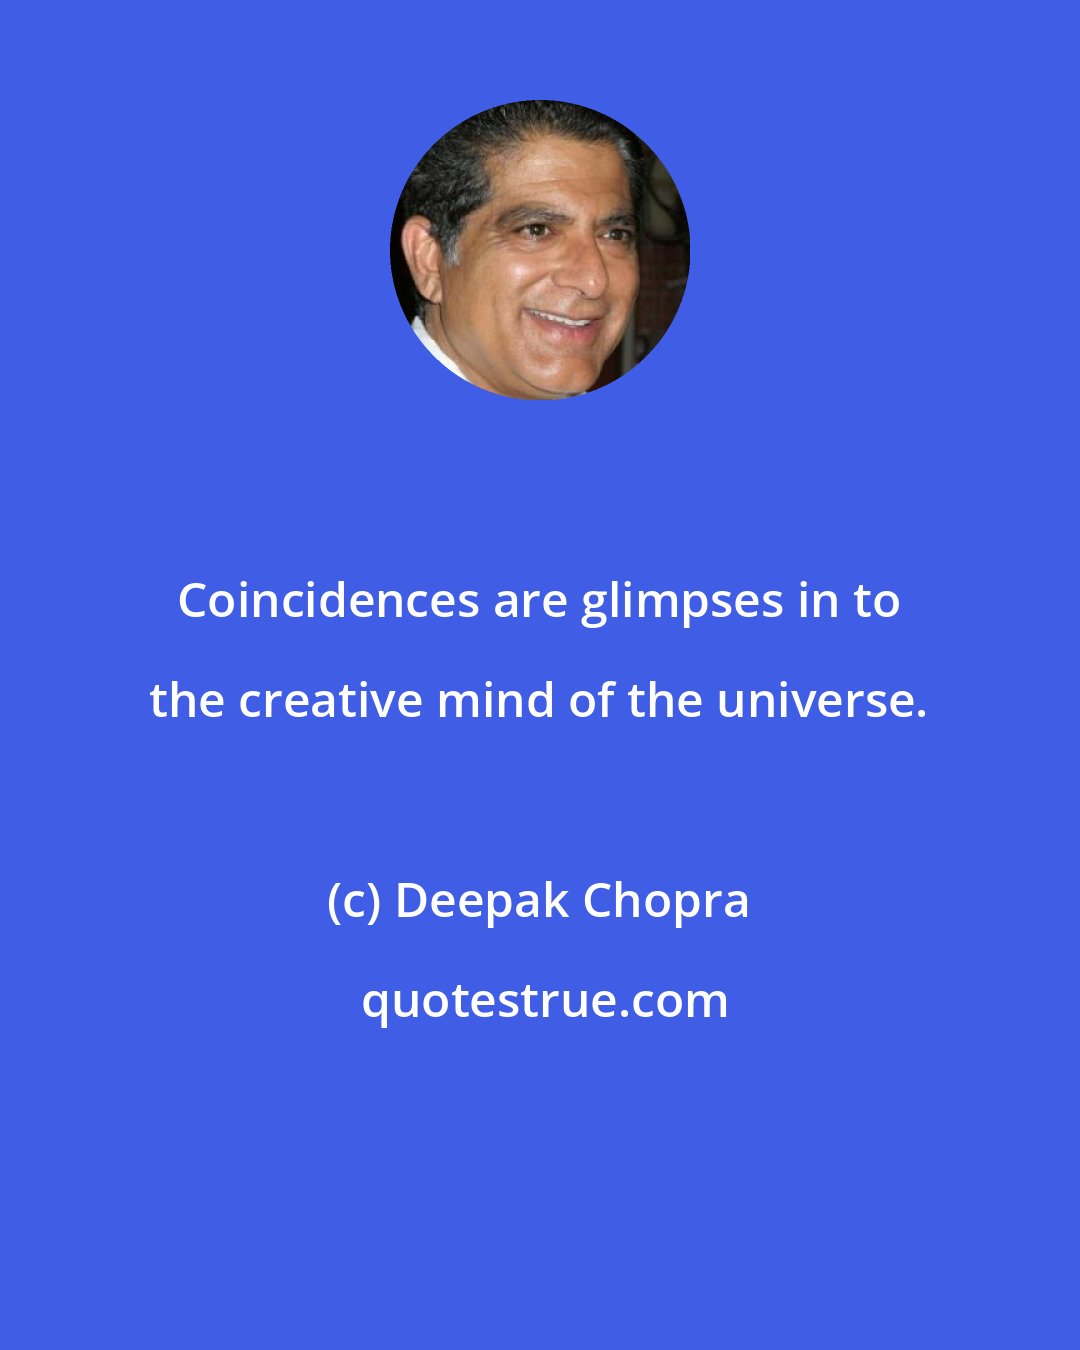 Deepak Chopra: Coincidences are glimpses in to the creative mind of the universe.